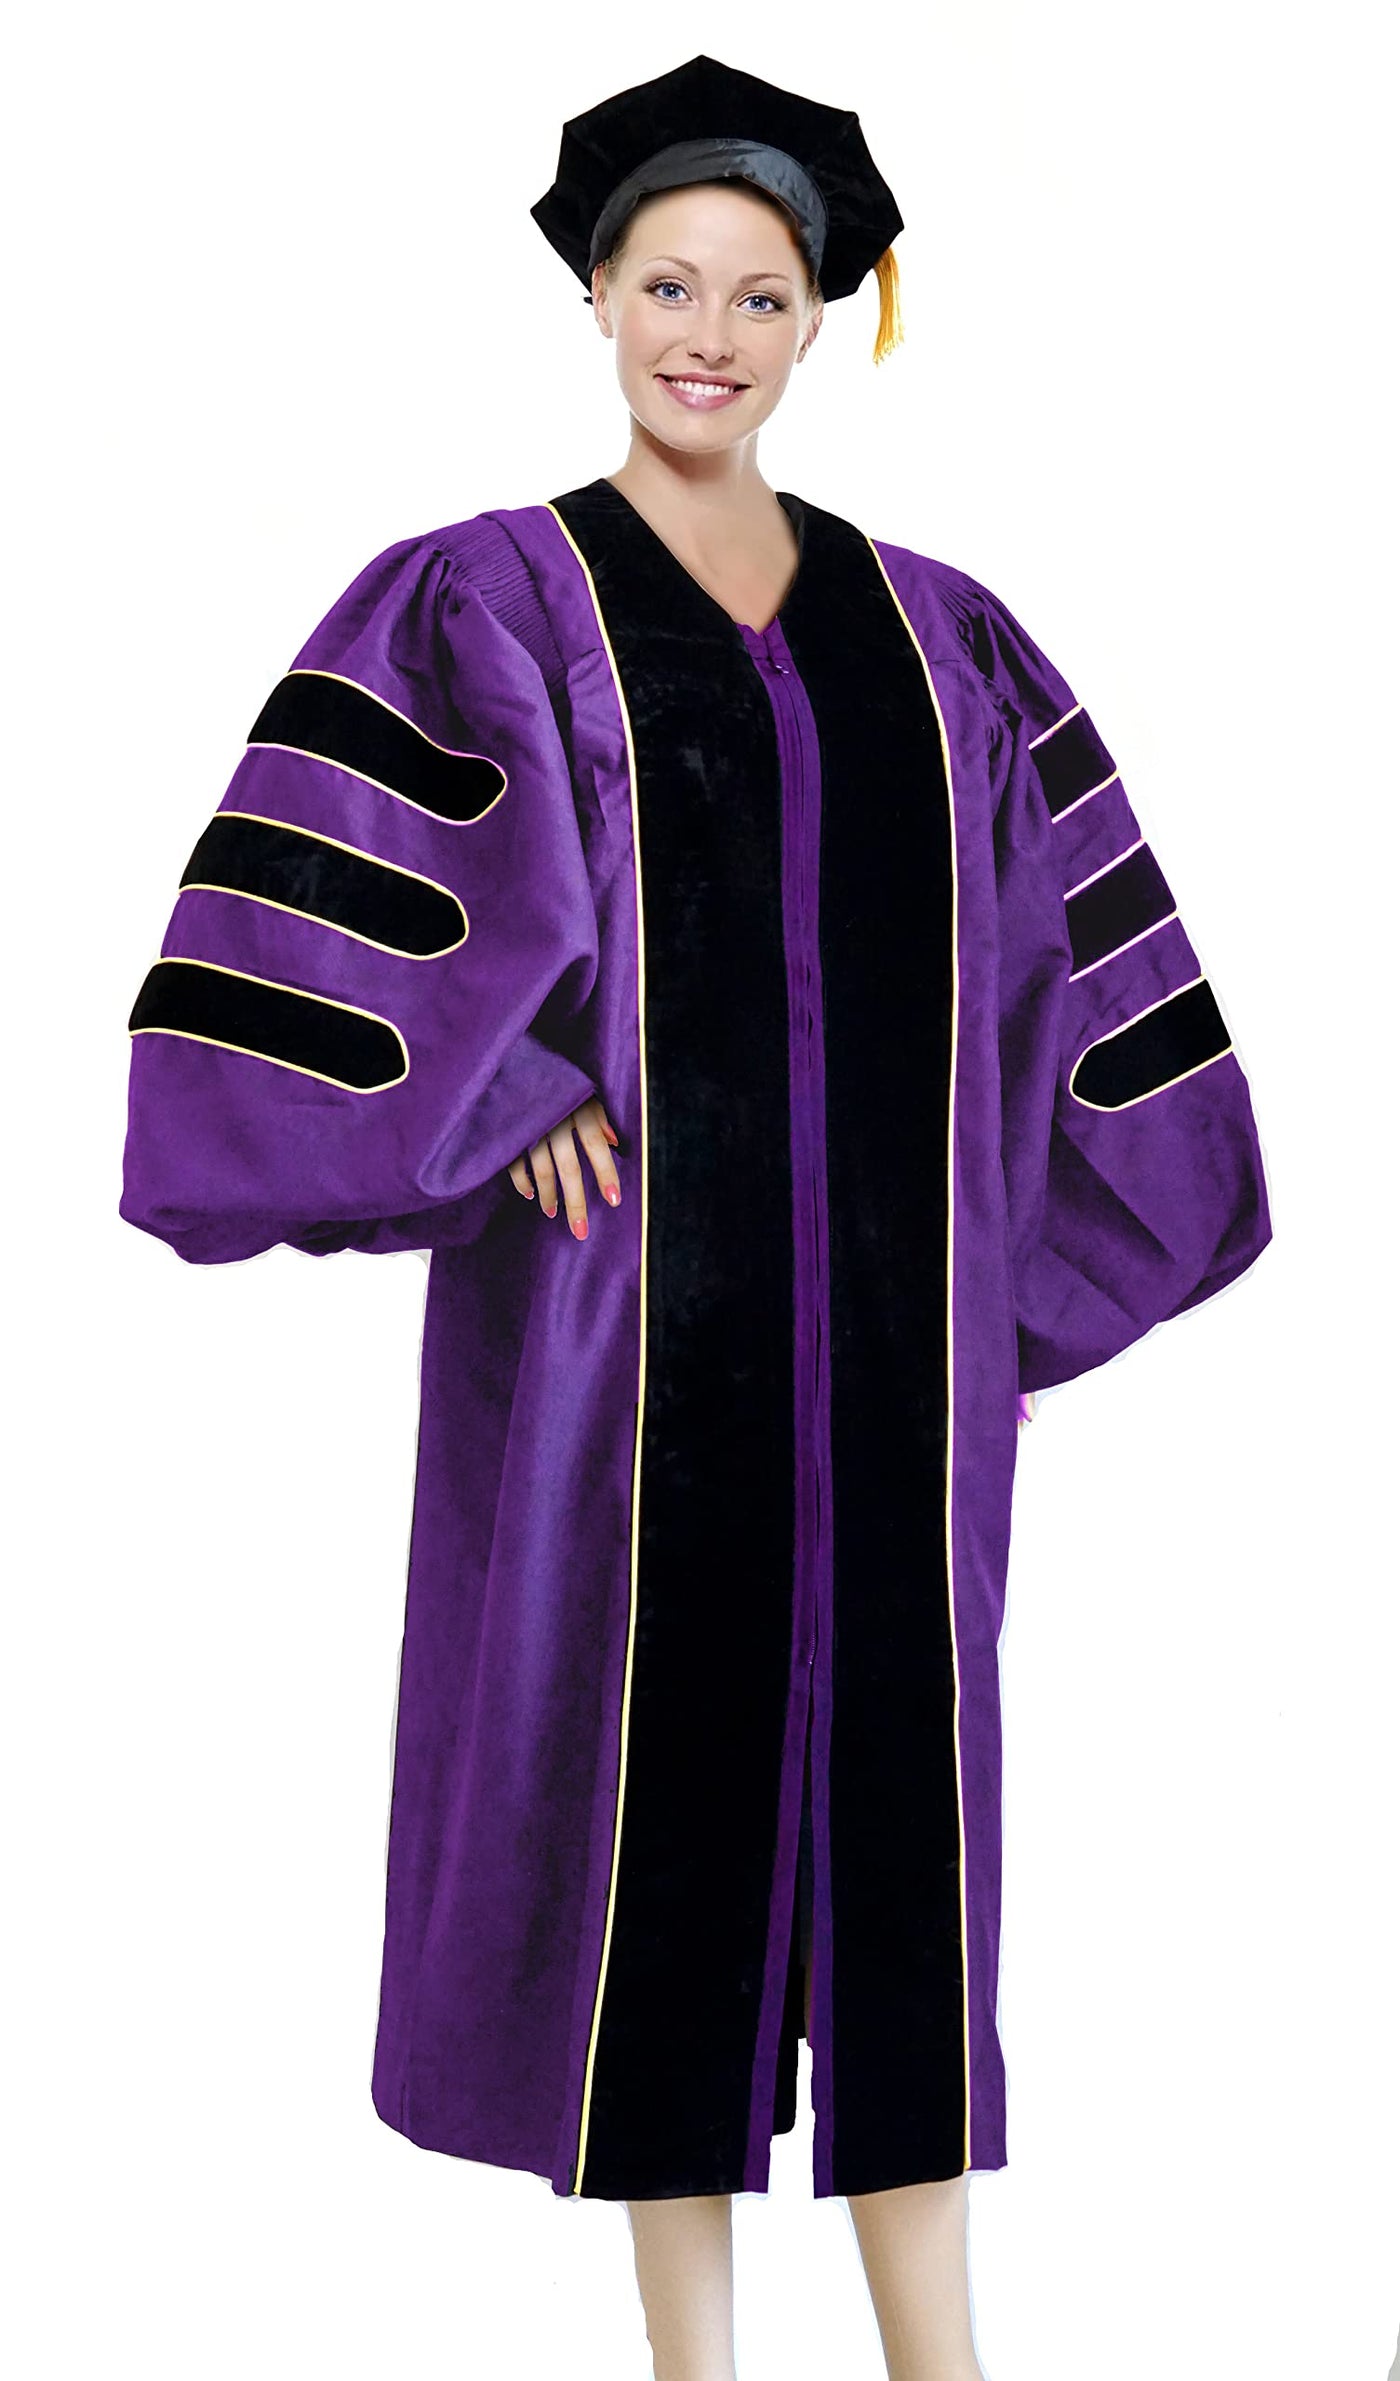 Premium Doctoral Tam Gown for Faculty and PhD Graduates Unisex